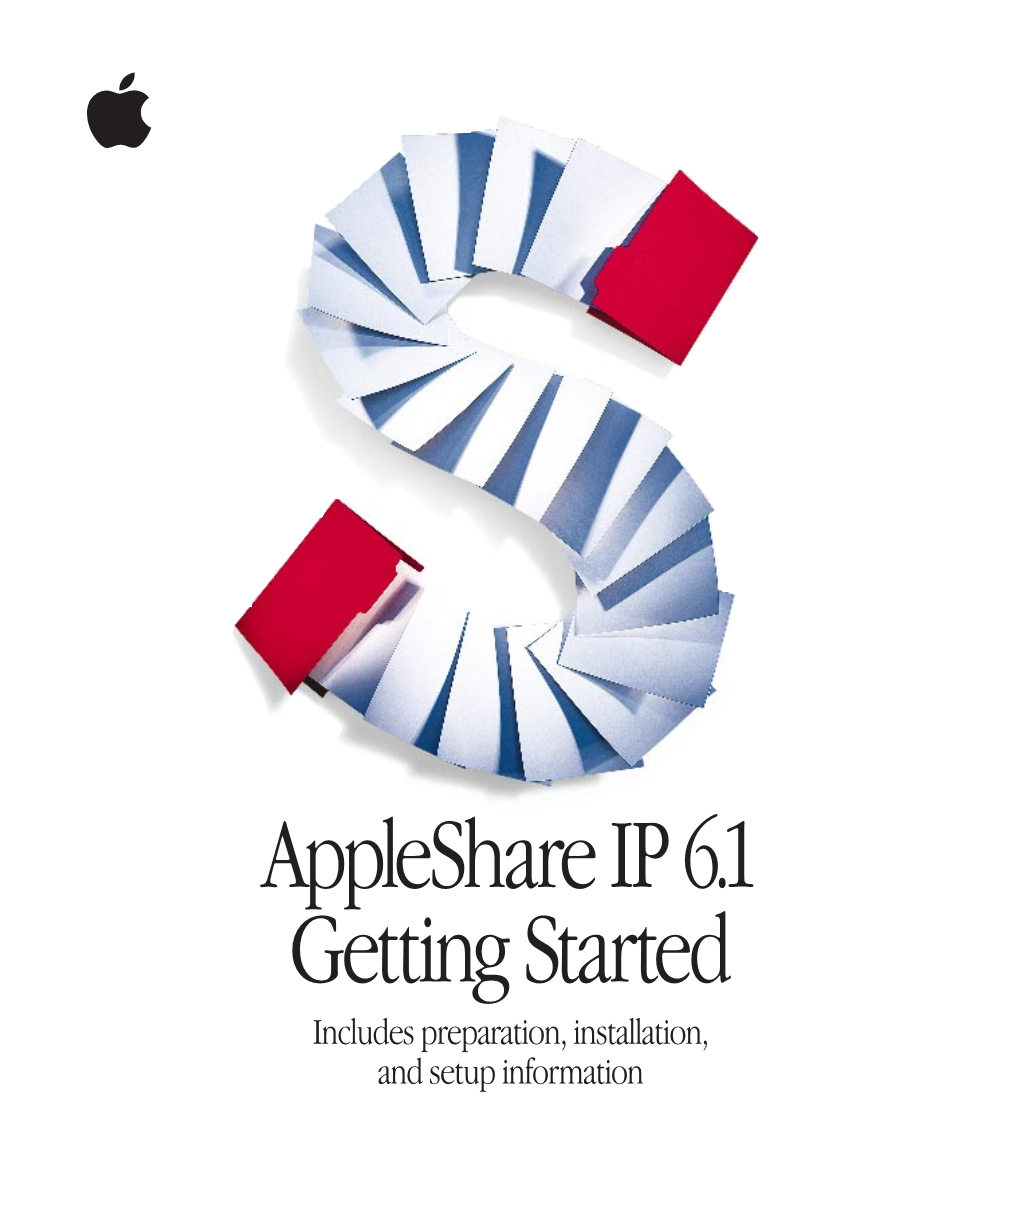 Appleshare IP 6.1 Getting Started Includes Preparation, Installation, and Setup Information